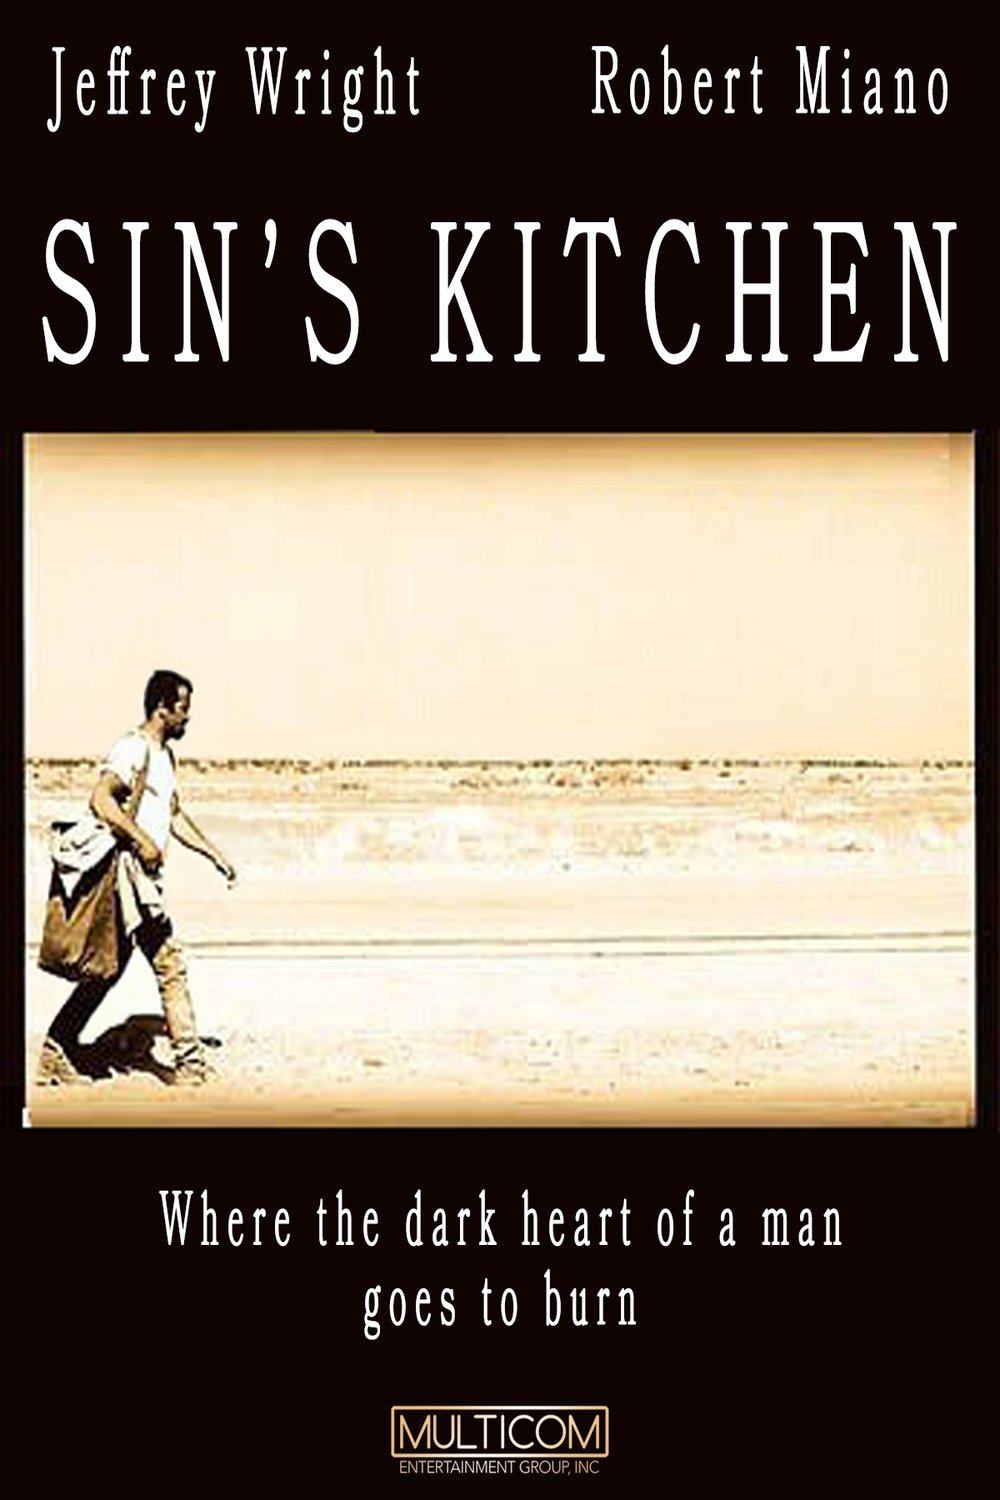 Poster of the movie Sin's Kitchen